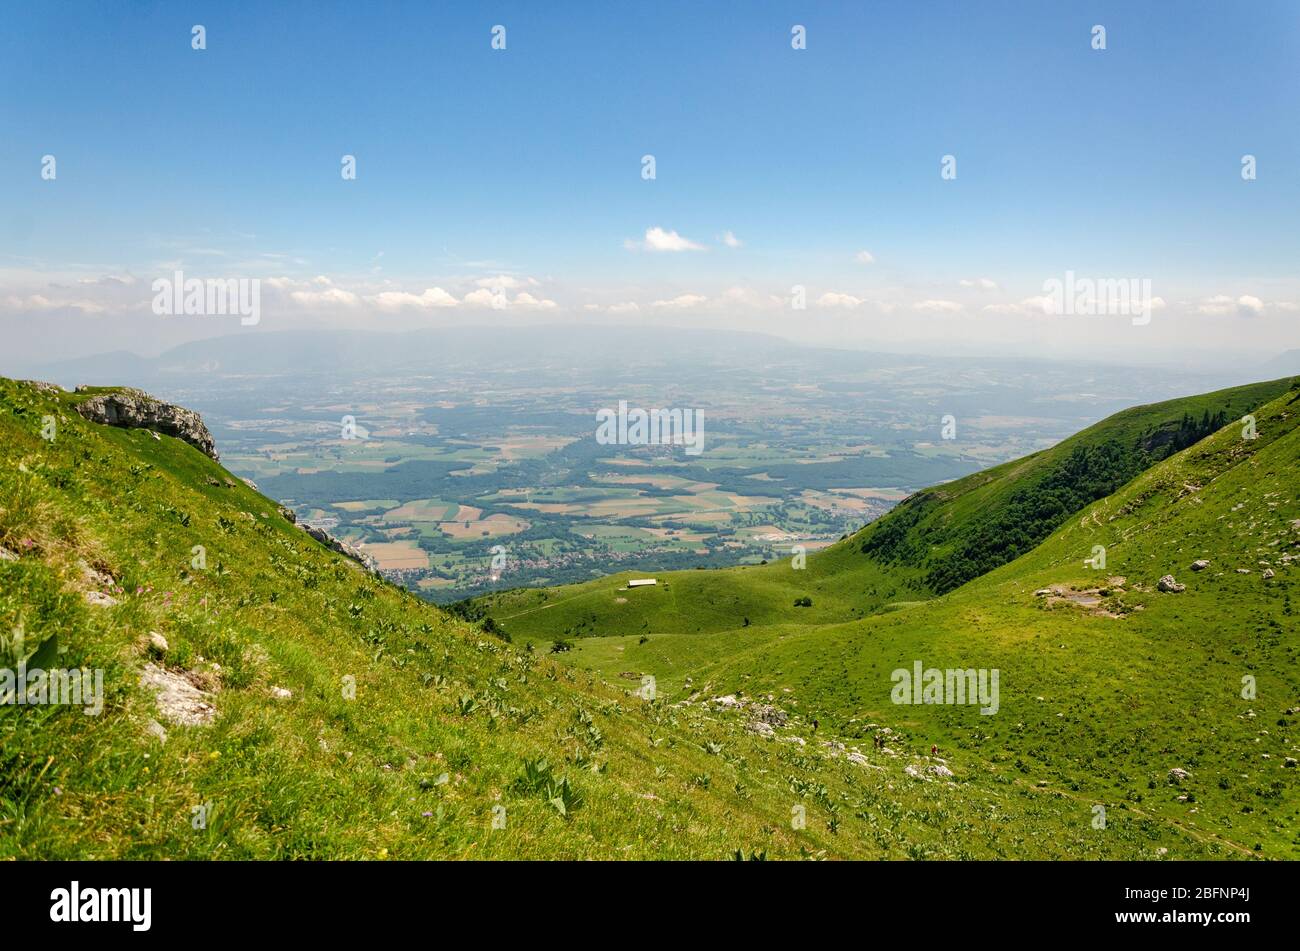 View of the Thoiry region in France and Geneva in Switzerland during summer season while hiking to Le Reculet in Jura Mountains, France Stock Photo